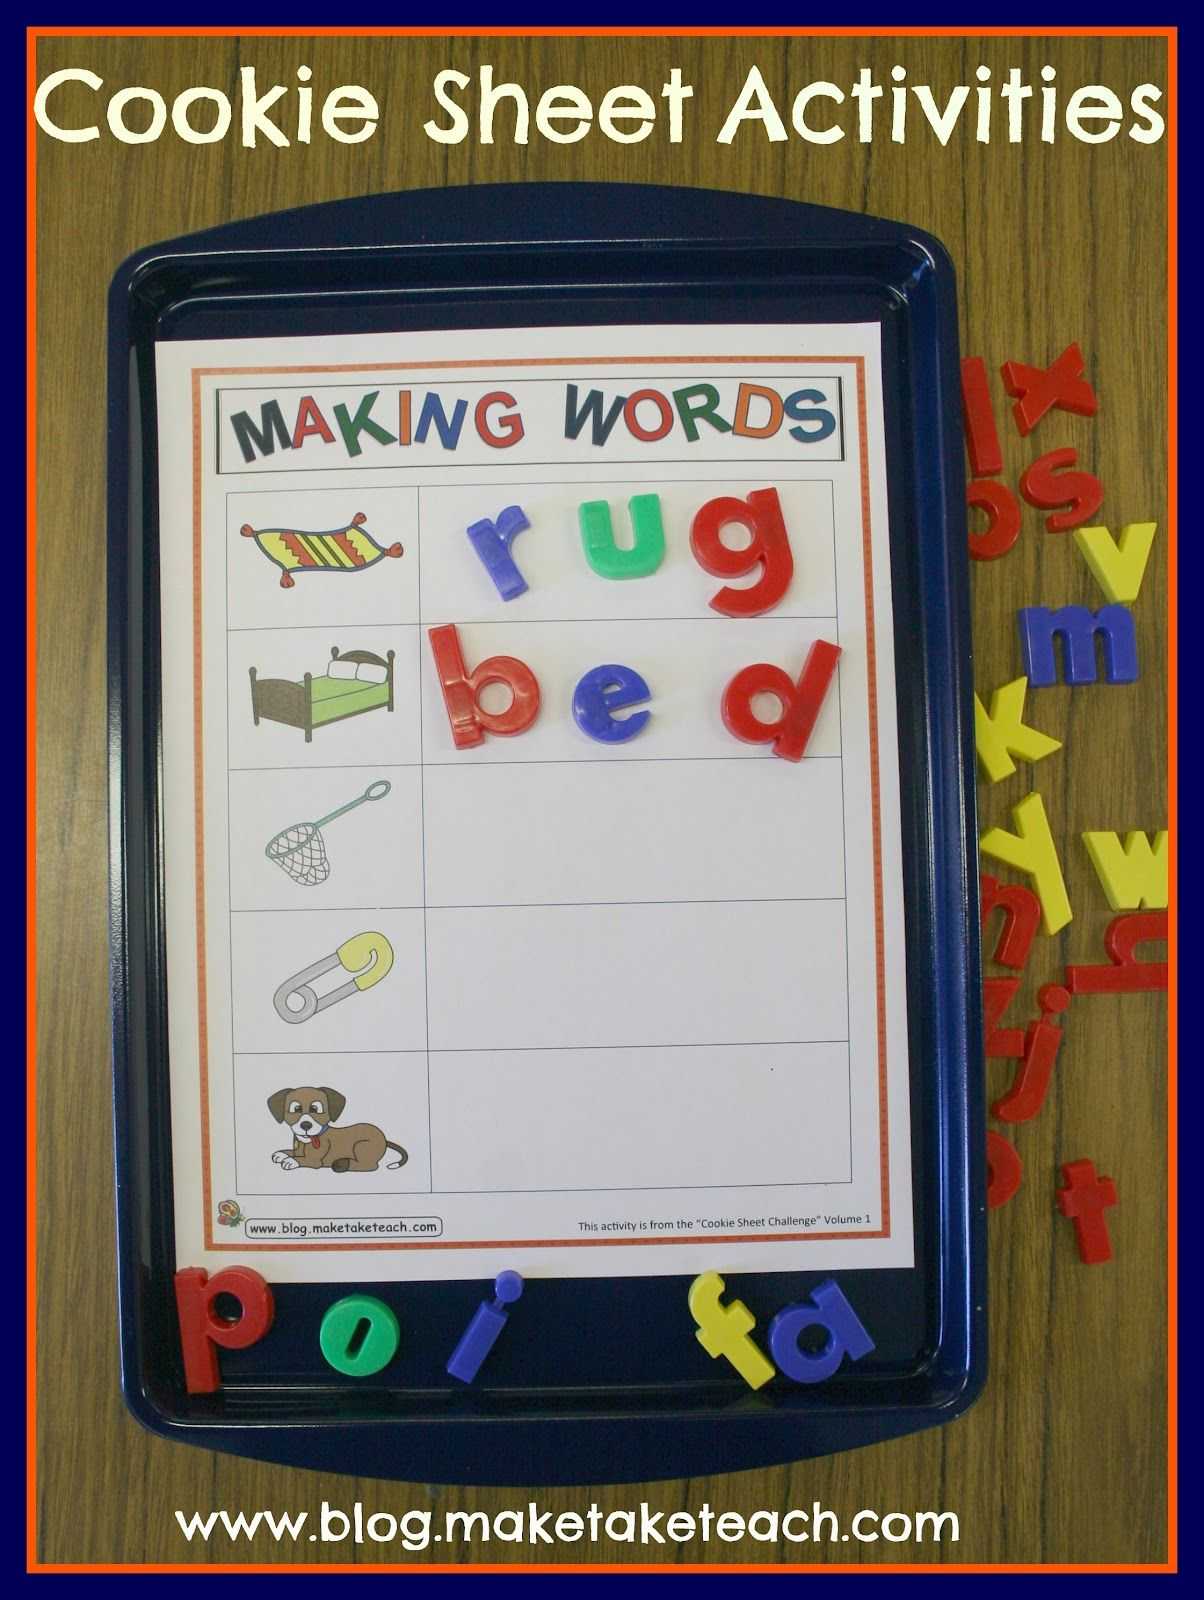 Making Words Templates | Making Words, Classroom Freebies Inside Making Words Template